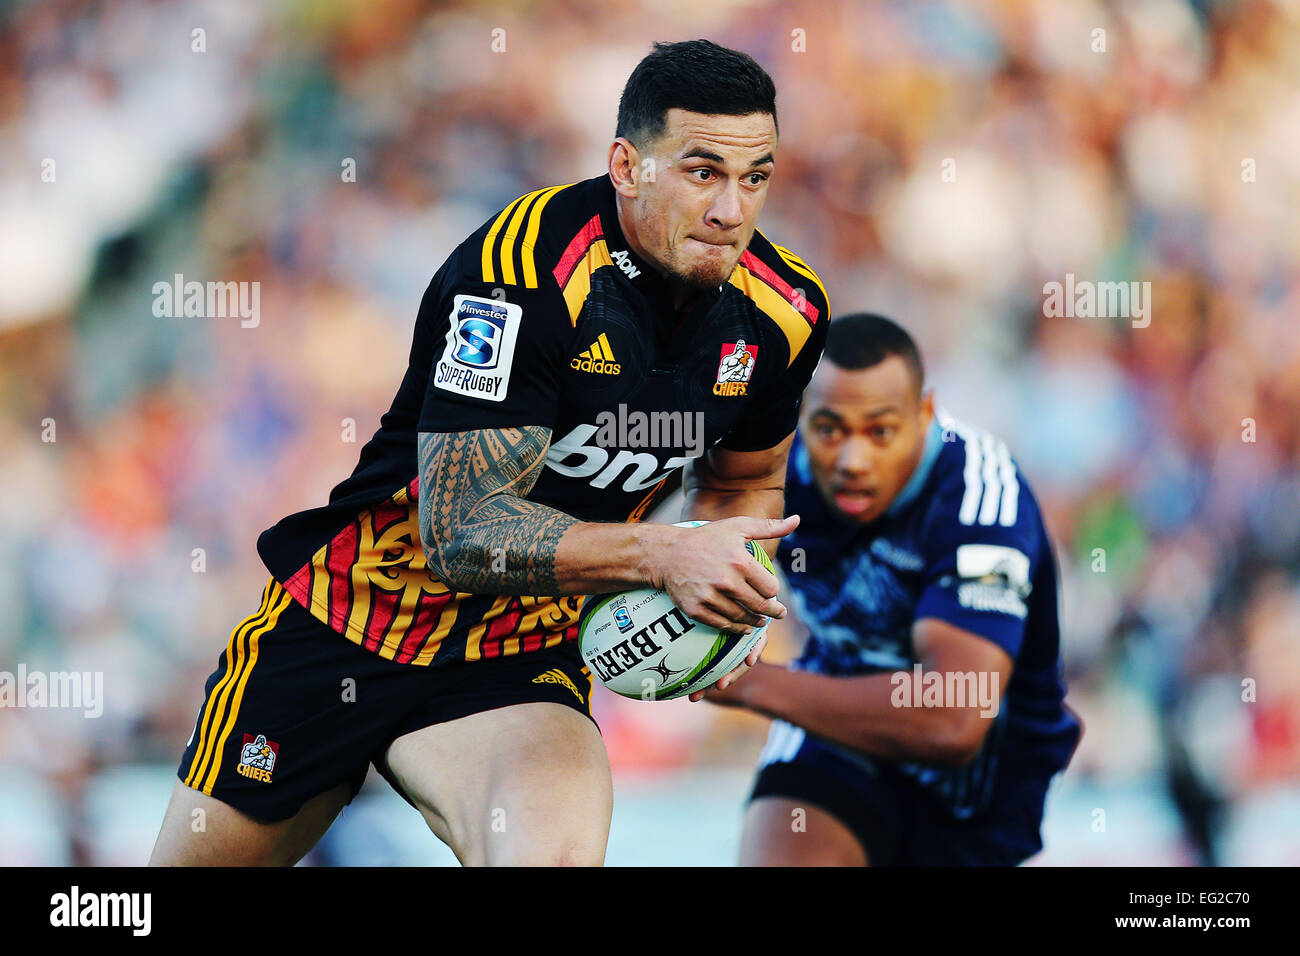 Auckland, New Zealand. 14th Feb, 2015. Sonny Bill Williams of the Chiefs makes a break. Super Rugby match, Blues (Auckland) versus Chiefs (Hamilton) at QBE Stadium, Auckland, New Zealand. Saturday 14 February 2015. The Chiefs ran out winners by 18-23 in a close derby. © Action Plus Sports/Alamy Live News Stock Photo